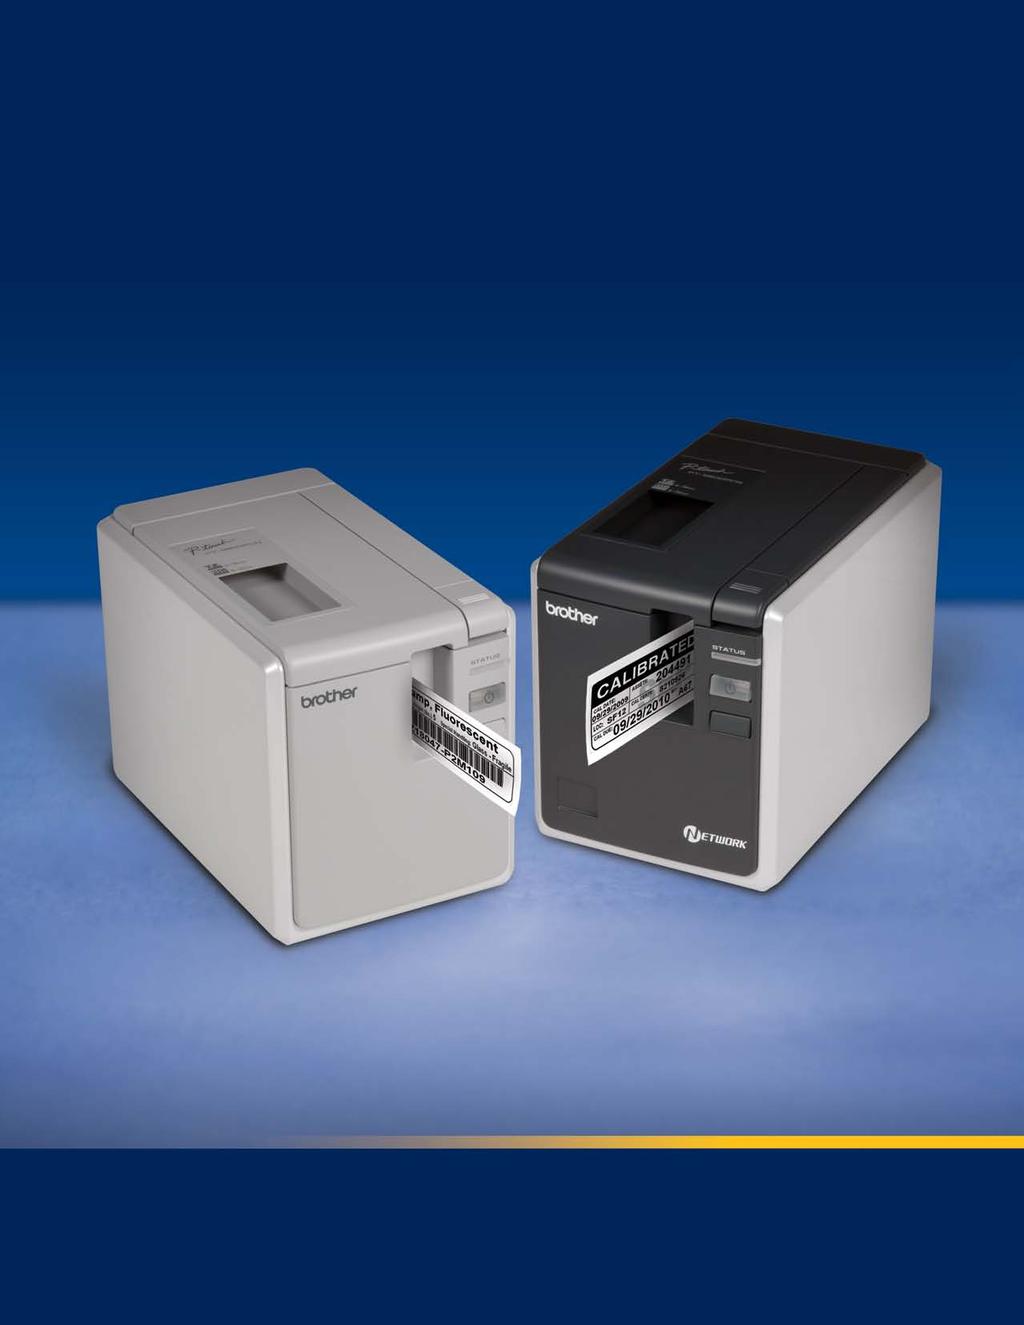 BROTHER PT-9700PC & PT-9800PCN Desktop Barcode and LABEL Printers Thermal Transfer Printers for Harsh Environment, Laminated Labels Giving your clients the best customer experience is one of the